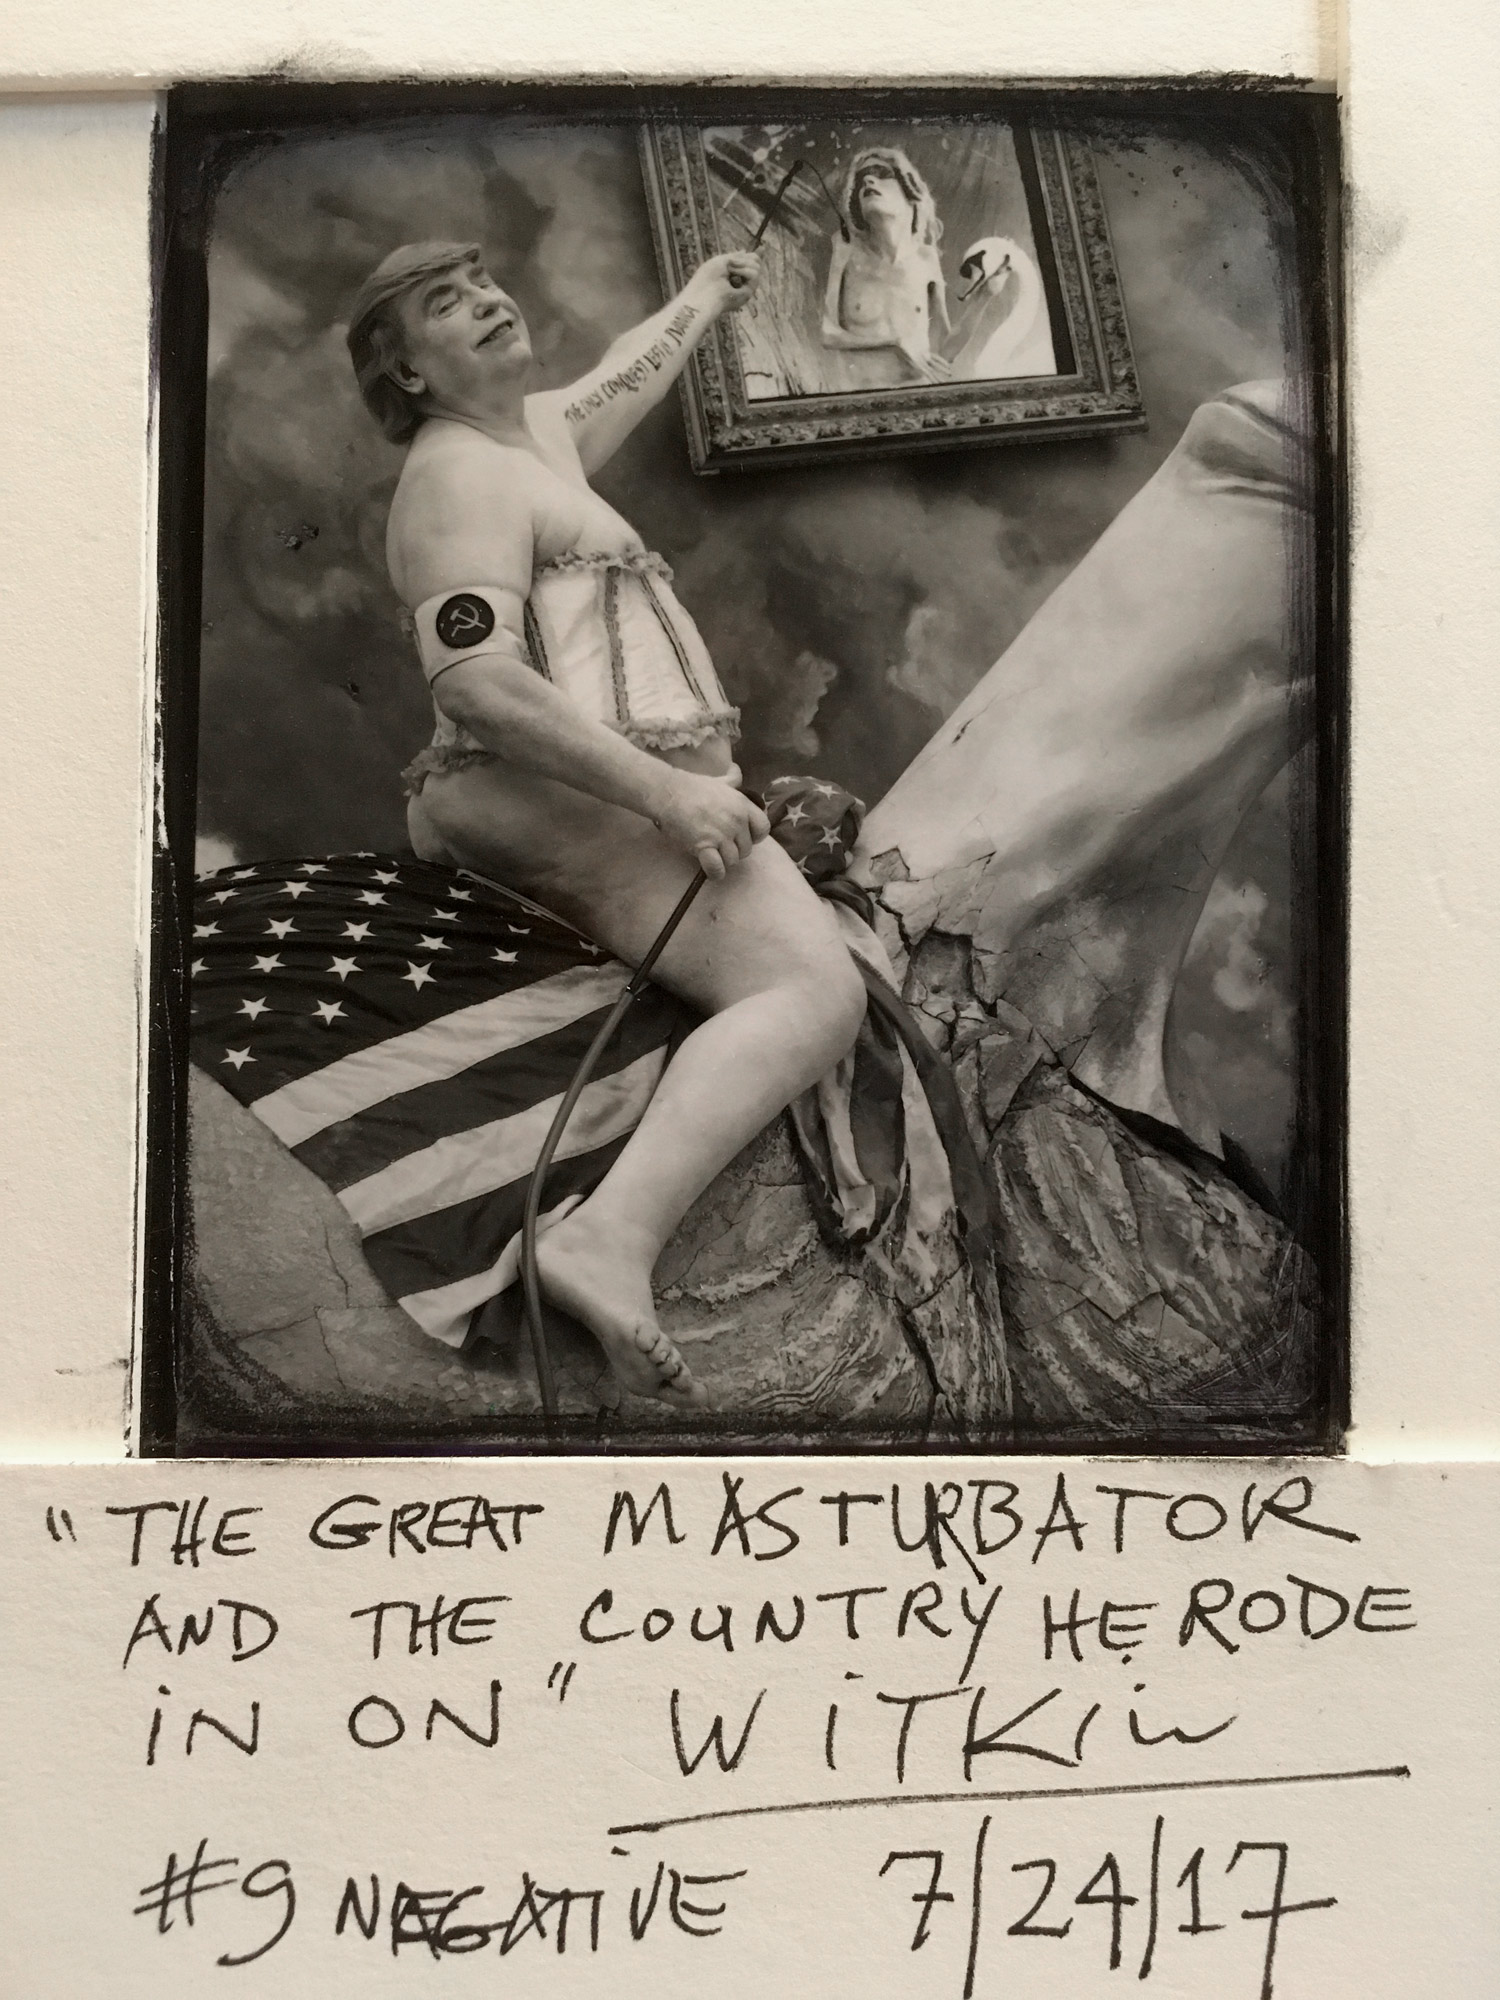 Joel-Peter Witkin - The Great Masturbator And The Country He Rode In On, New Mexico 2017.jpg